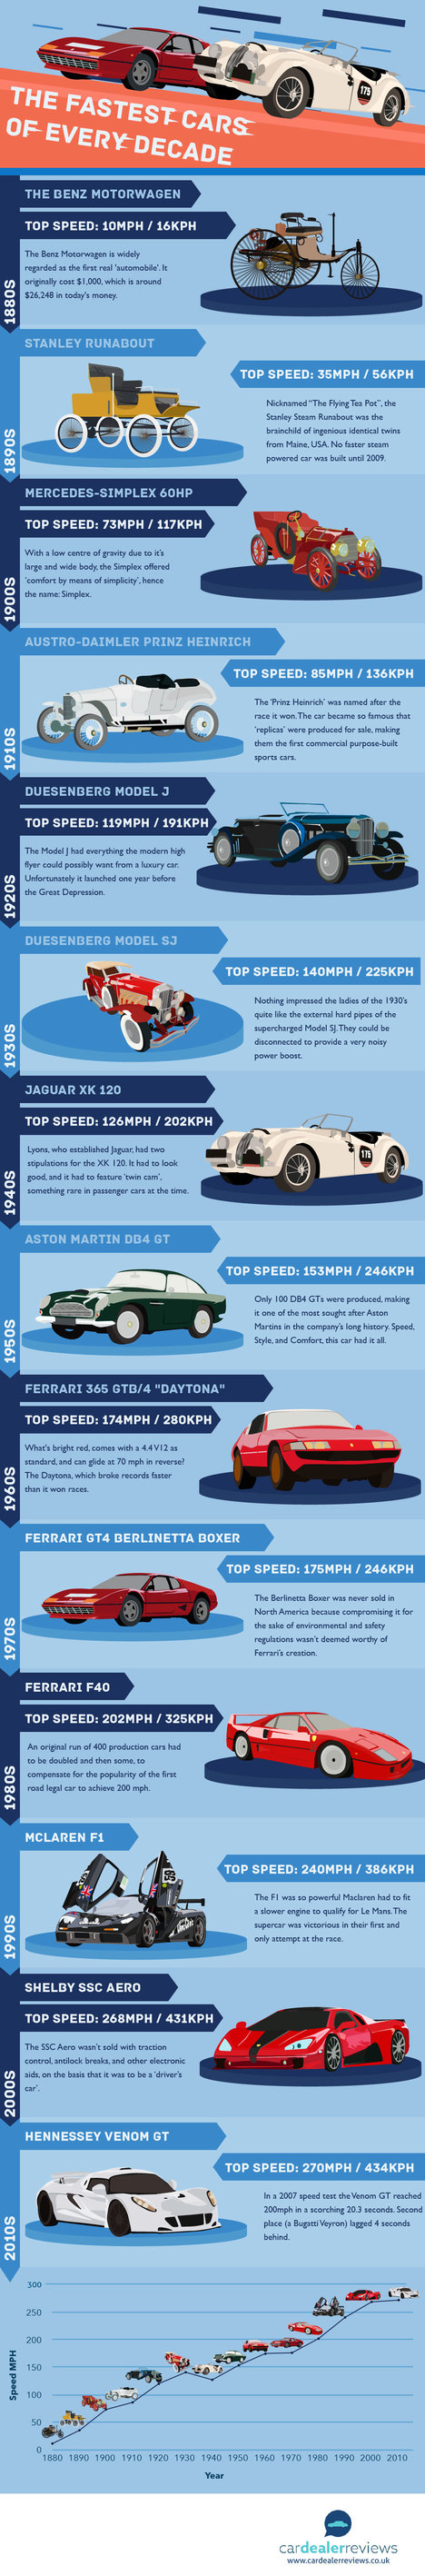 The Fastest Cars of Every Decade